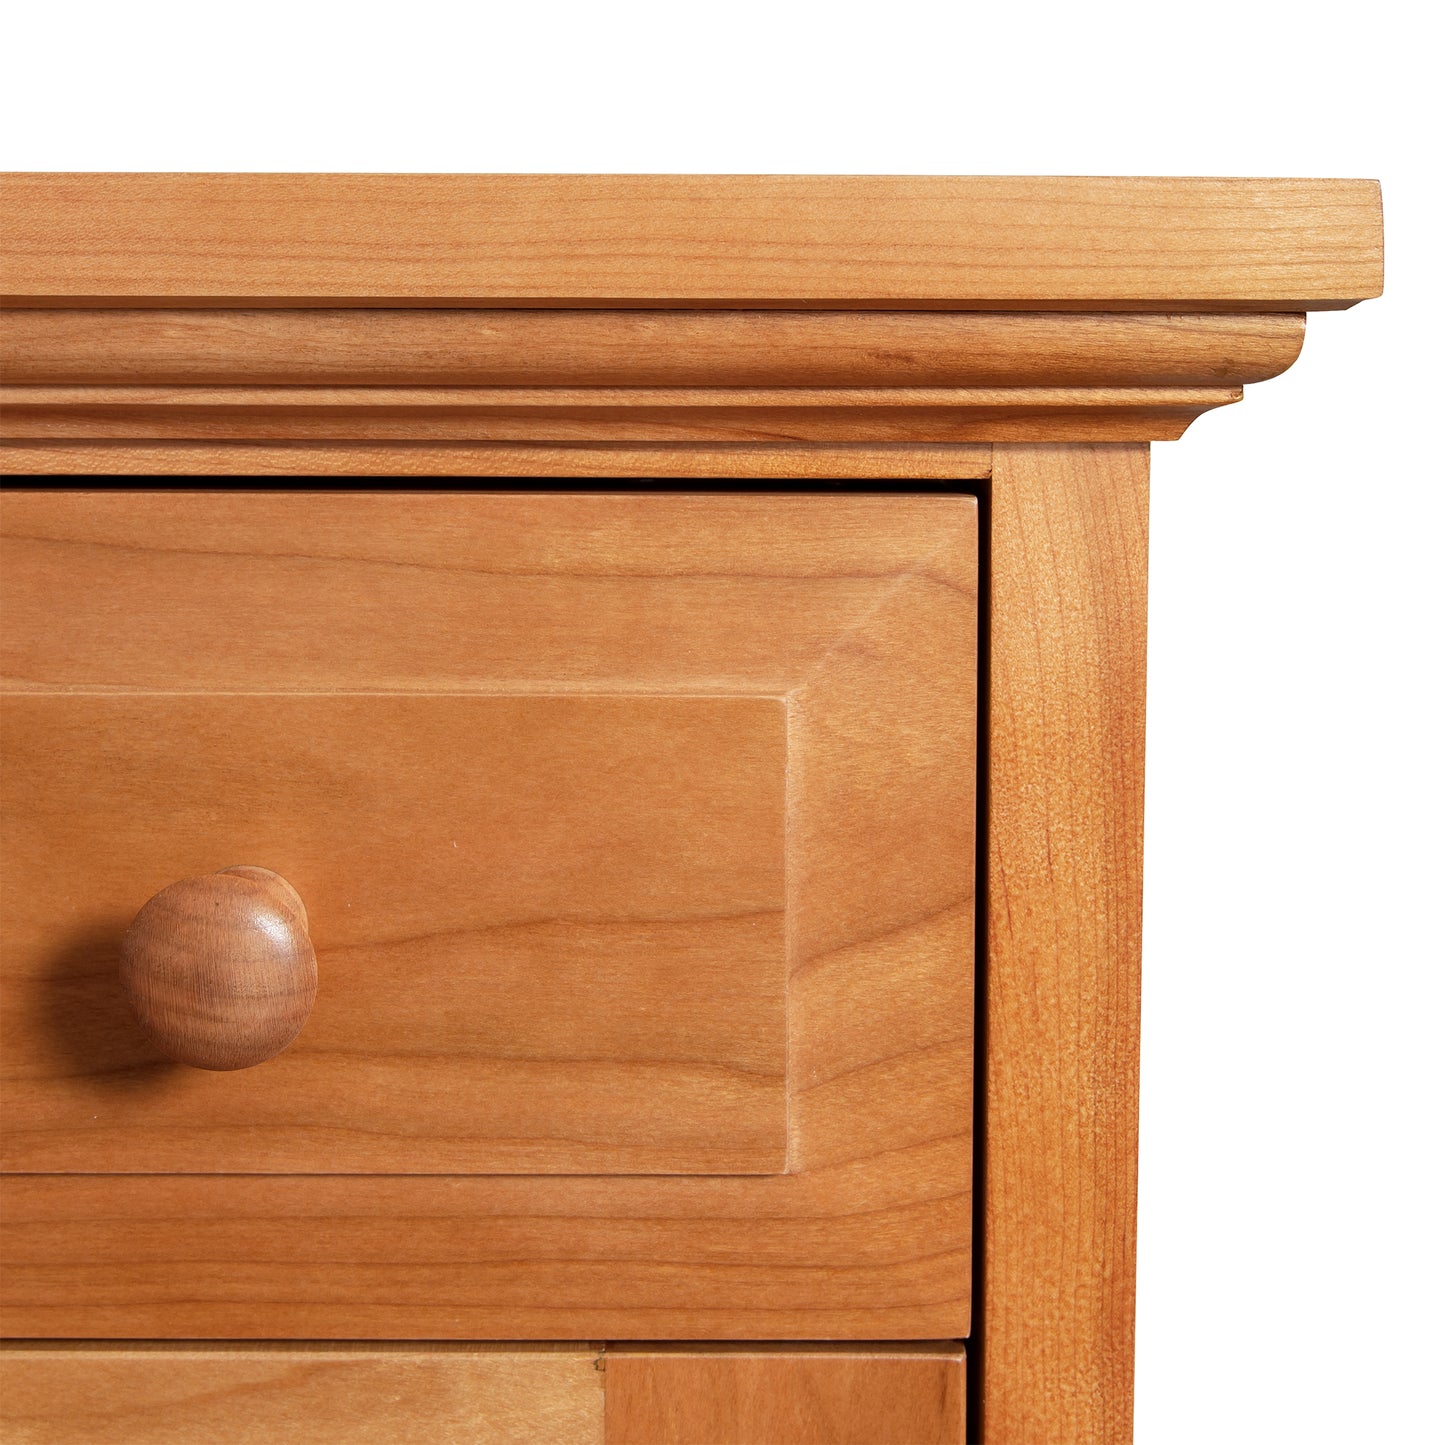 A close up of a Lyndon Furniture New England Shaker Buffet with a knob, perfect for dining room storage.